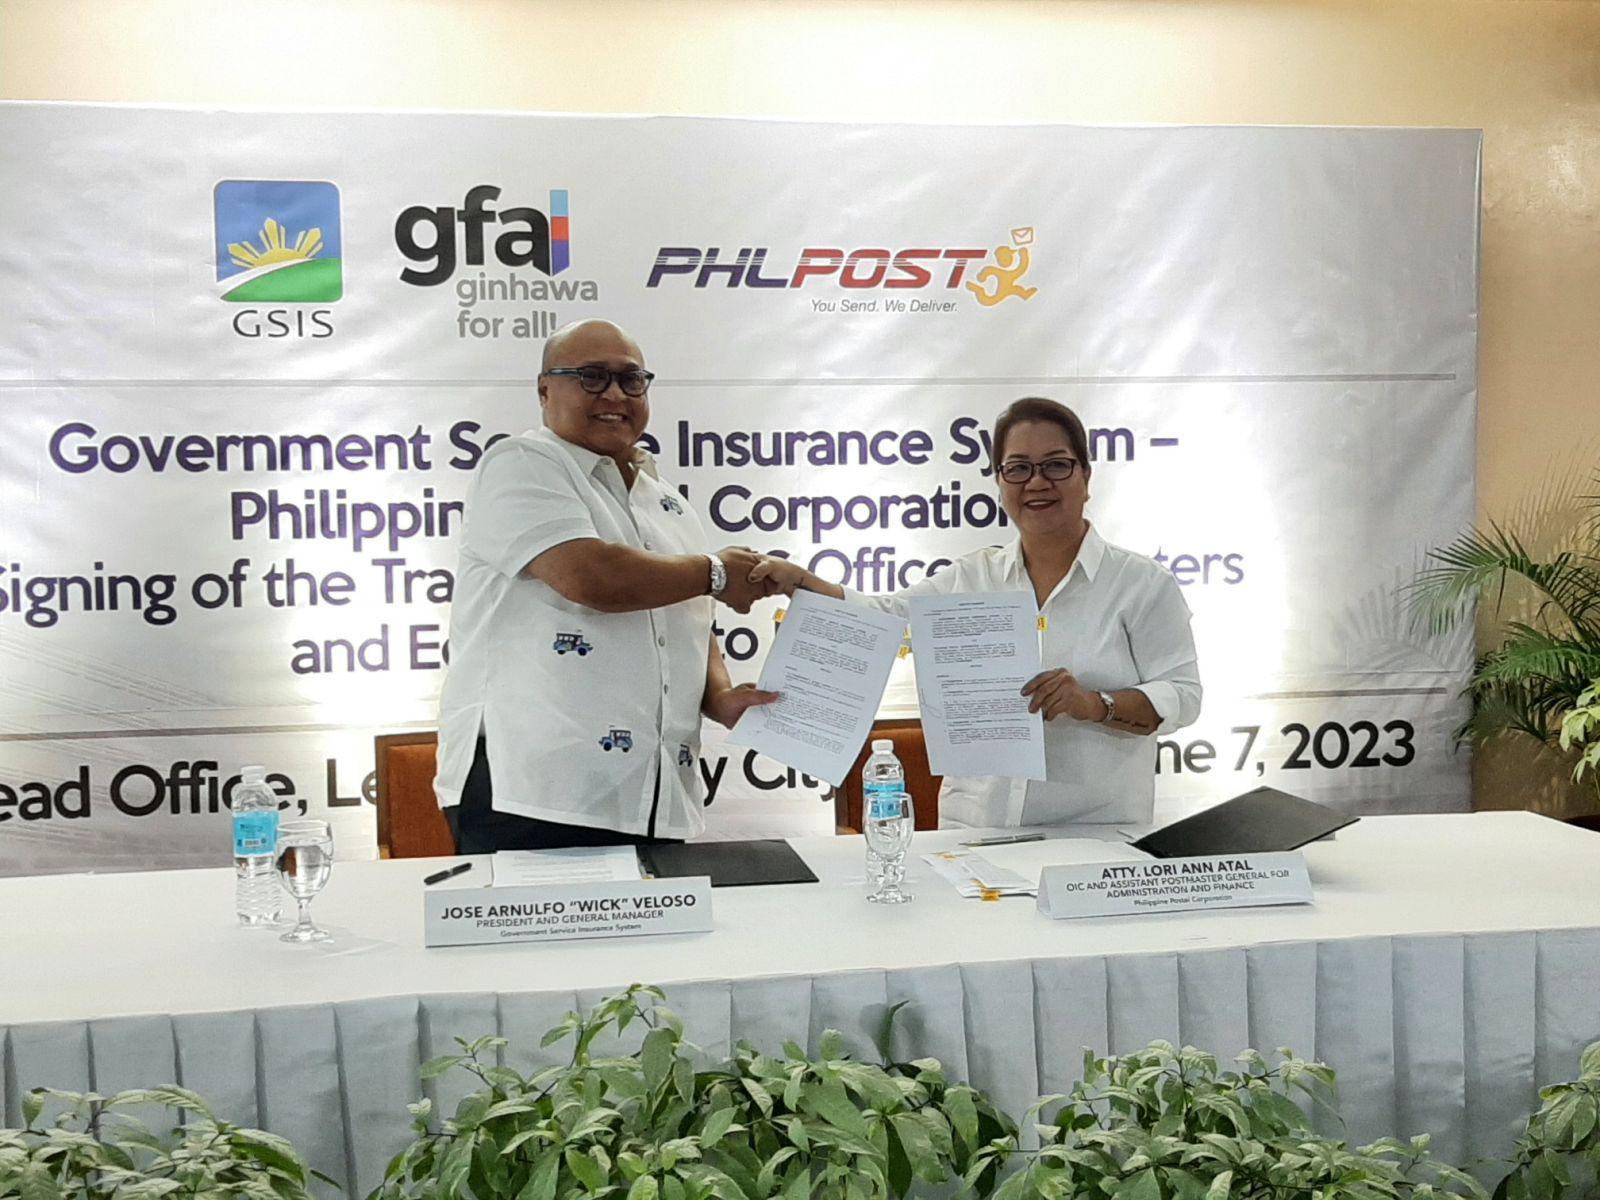 GSIS donates office equipment, computers to PHLPost